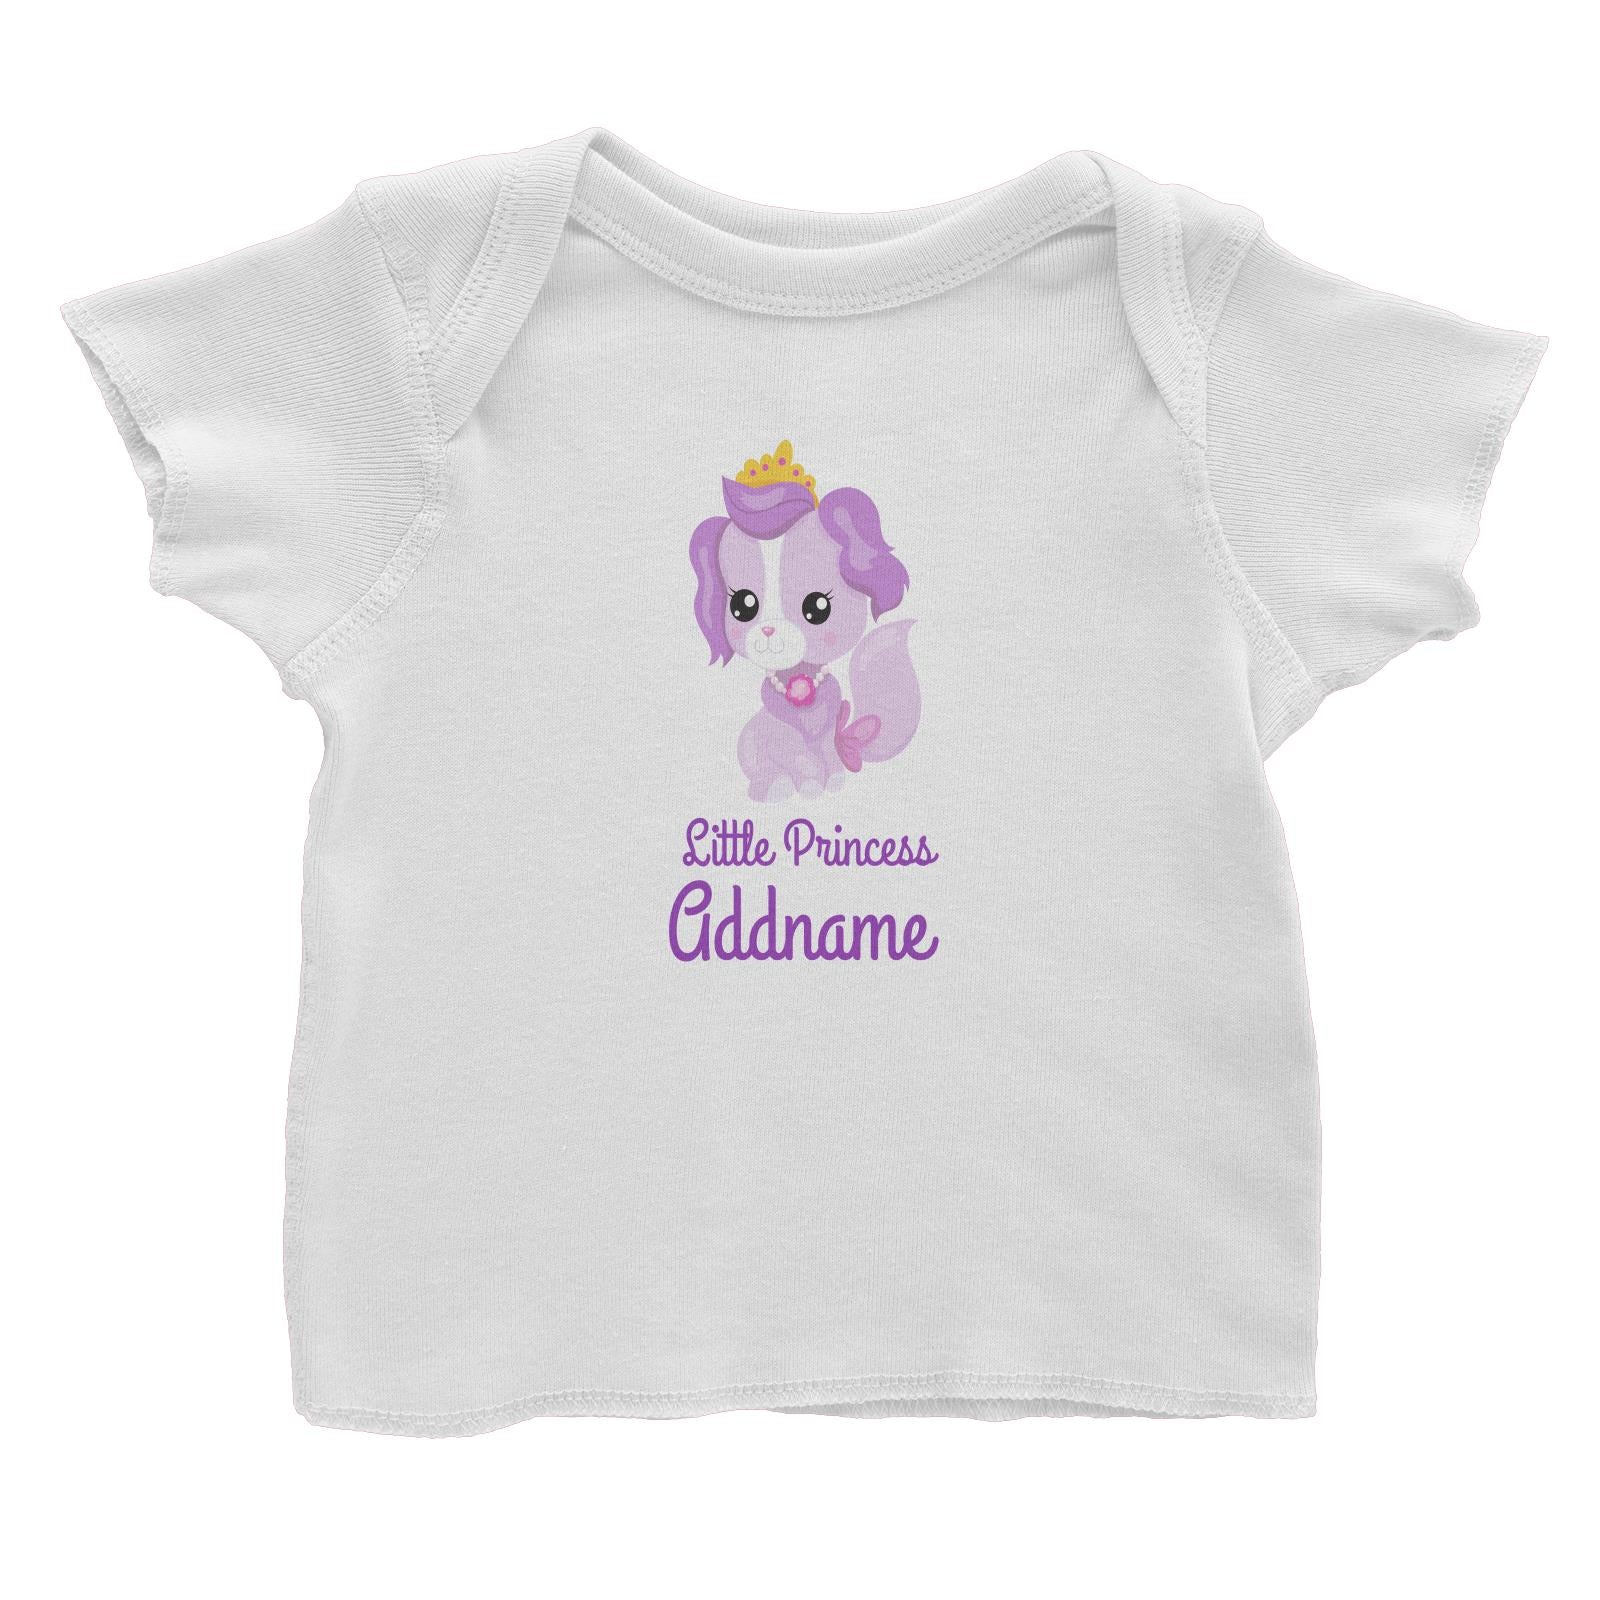 Little Princess Pets Purple Dog with Crown Addname Baby T-Shirt